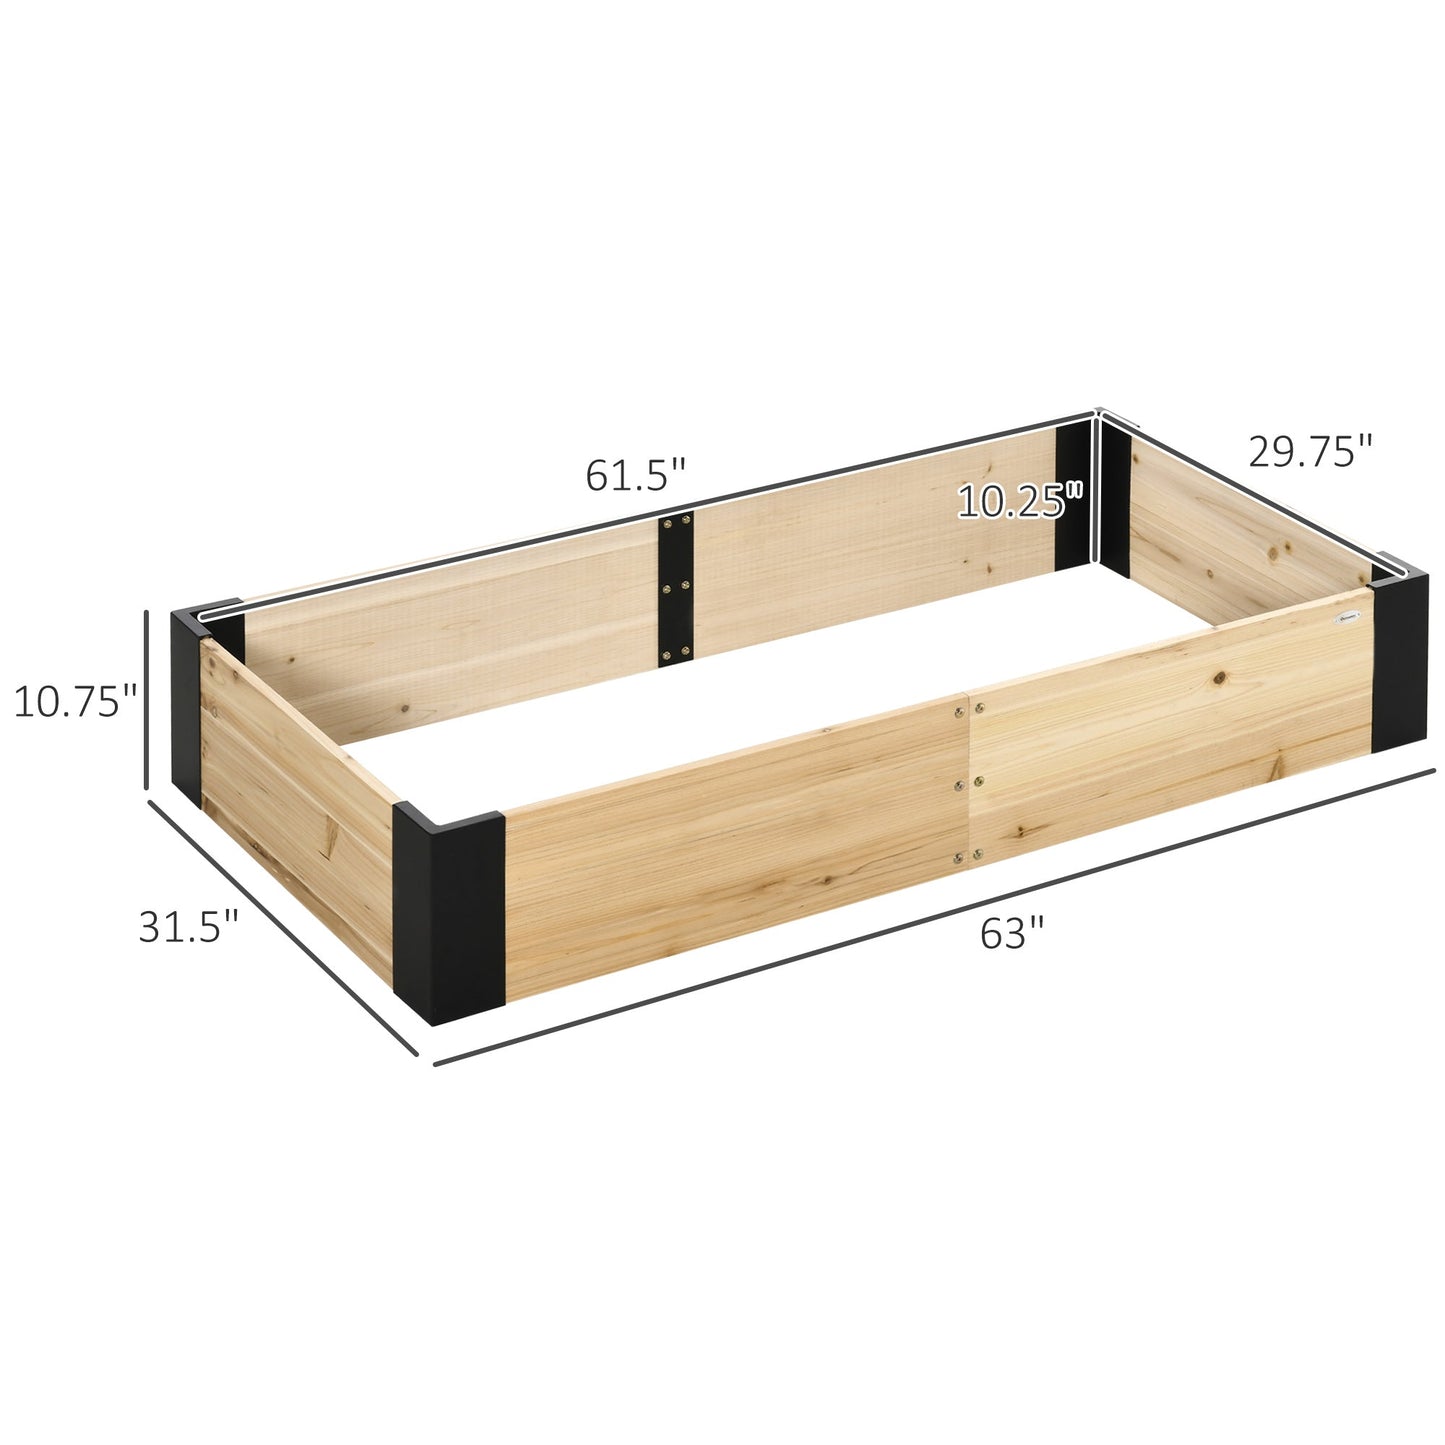 63" x 32" Raised Garden Bed with Metal Corner Bracket, Easy to Install Planter Box for Growing Vegetables, Flowers, Fruits, Herbs, and Succulents at Gallery Canada